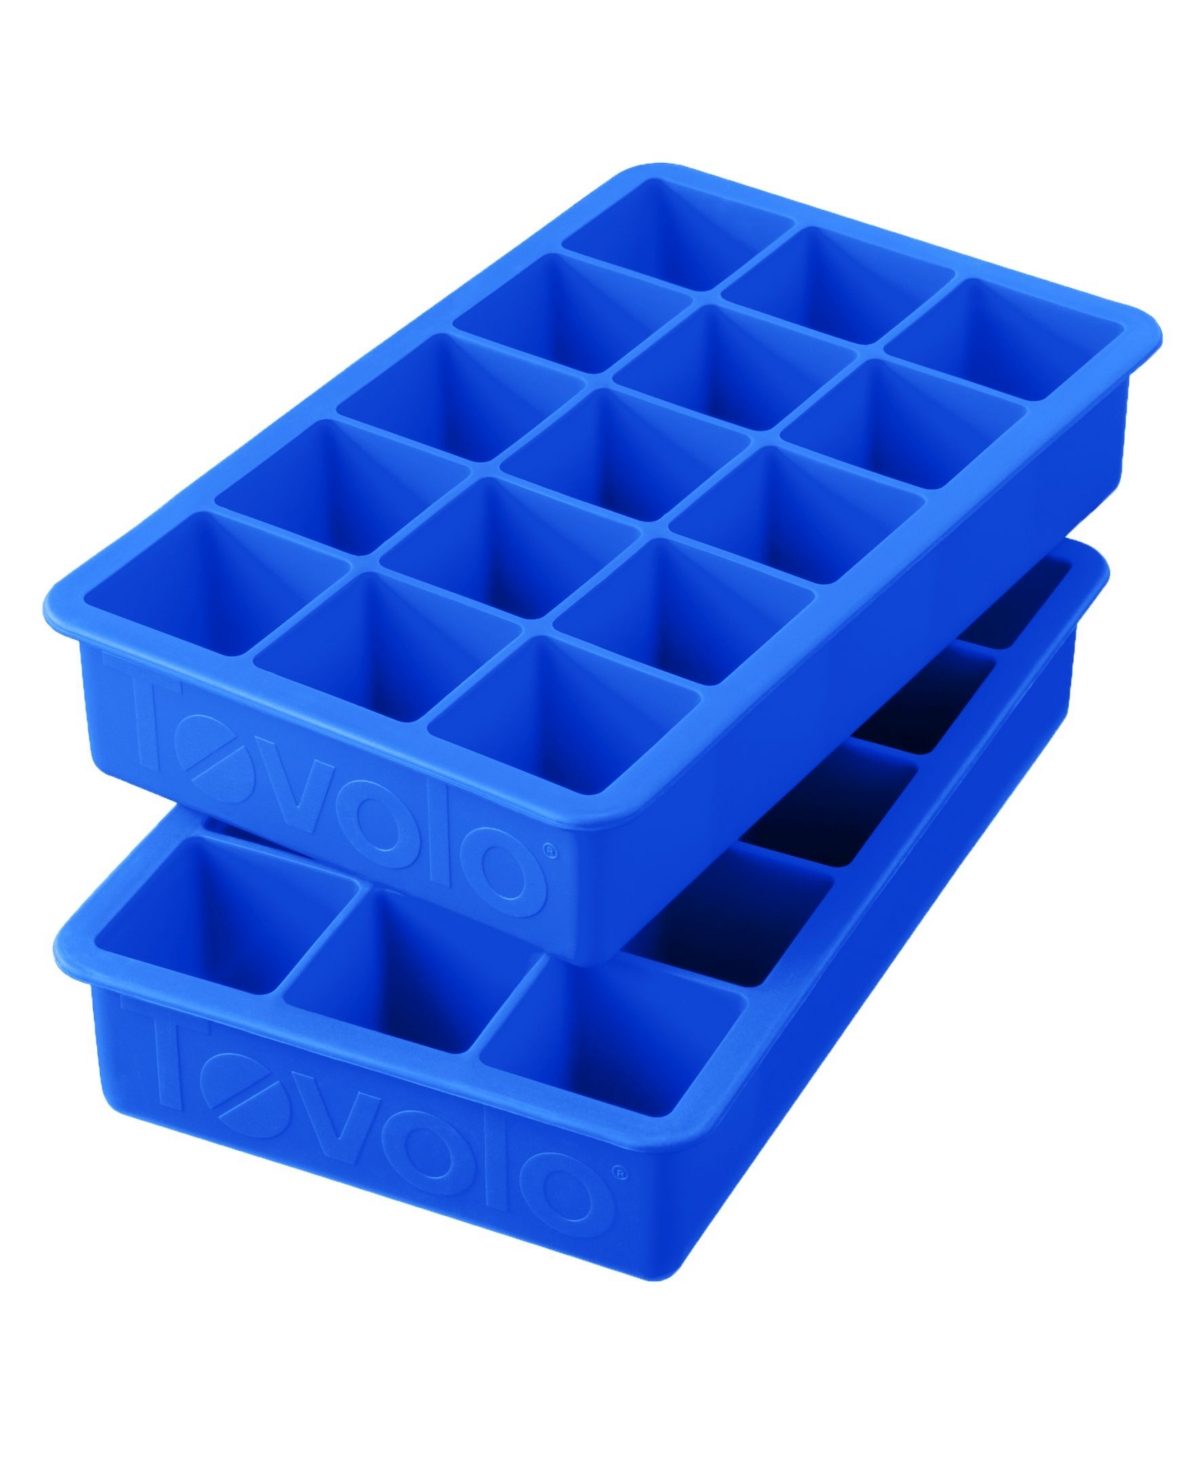 Tovolo Perfect Cube Silicone Ice Mold Freezer Tray Of 1.25" Cubes For Whiskey In Blue